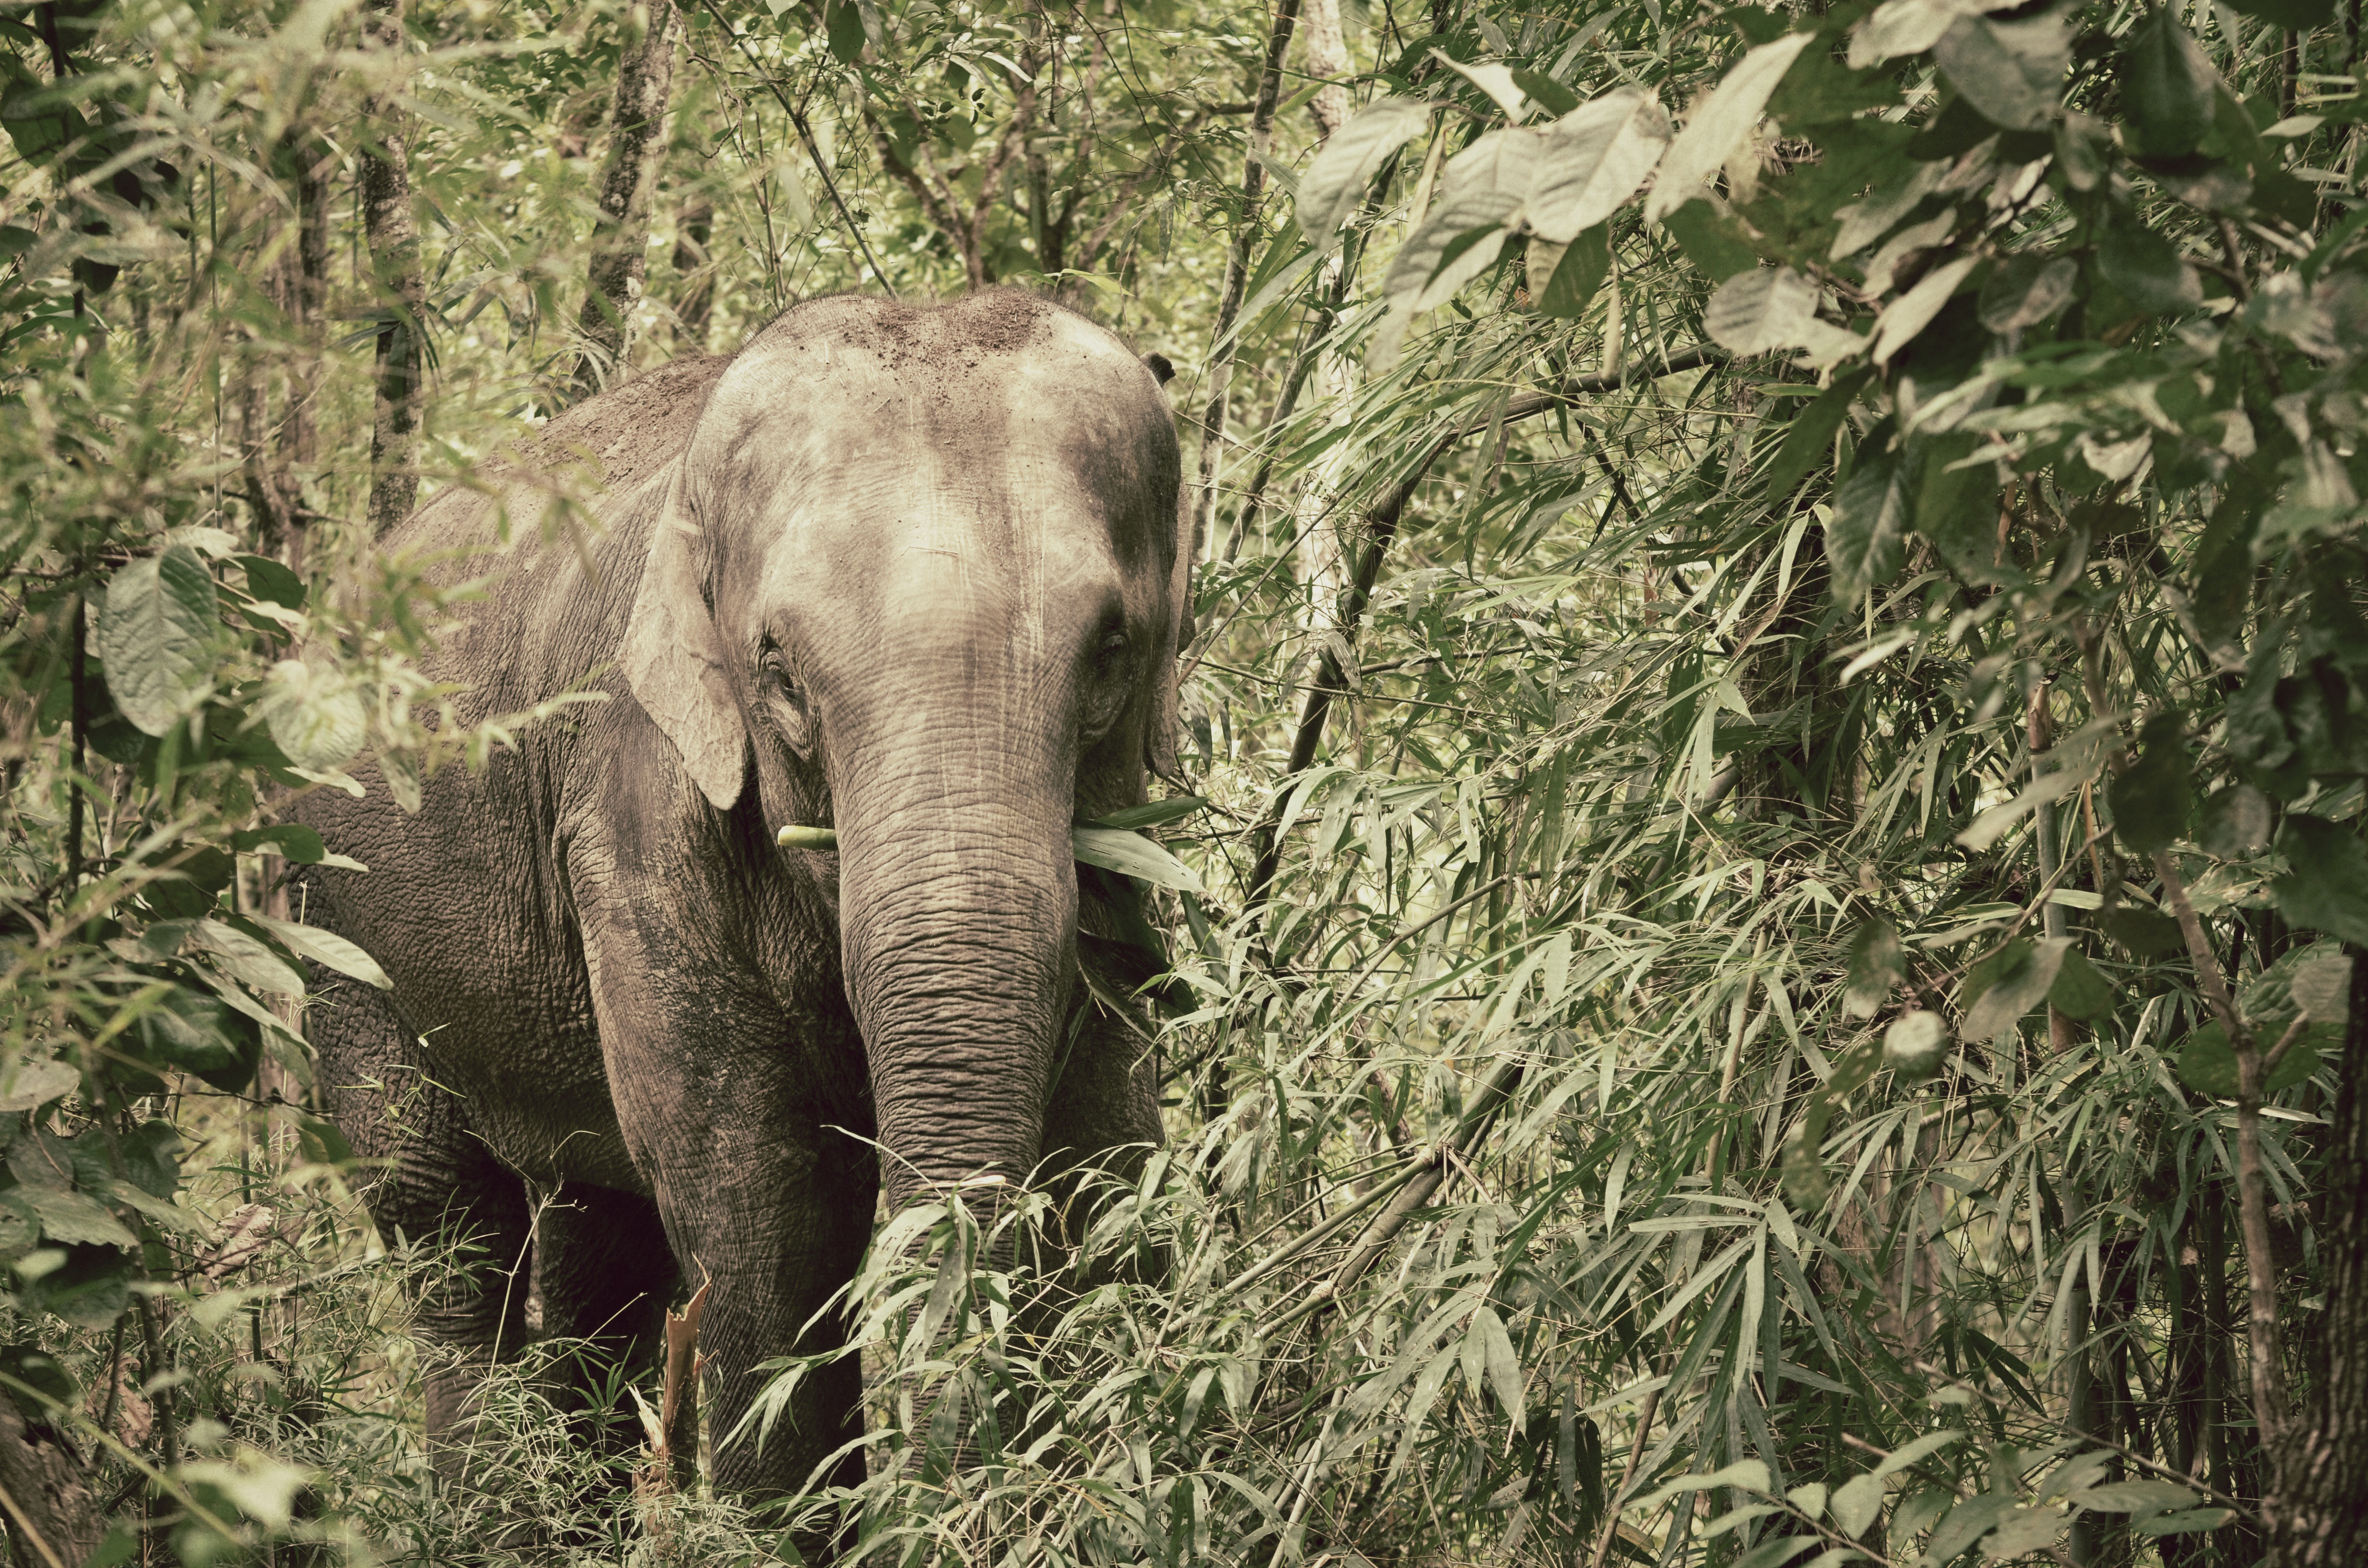 Visit the Elephant Nature Park when you are in Chiang Mai